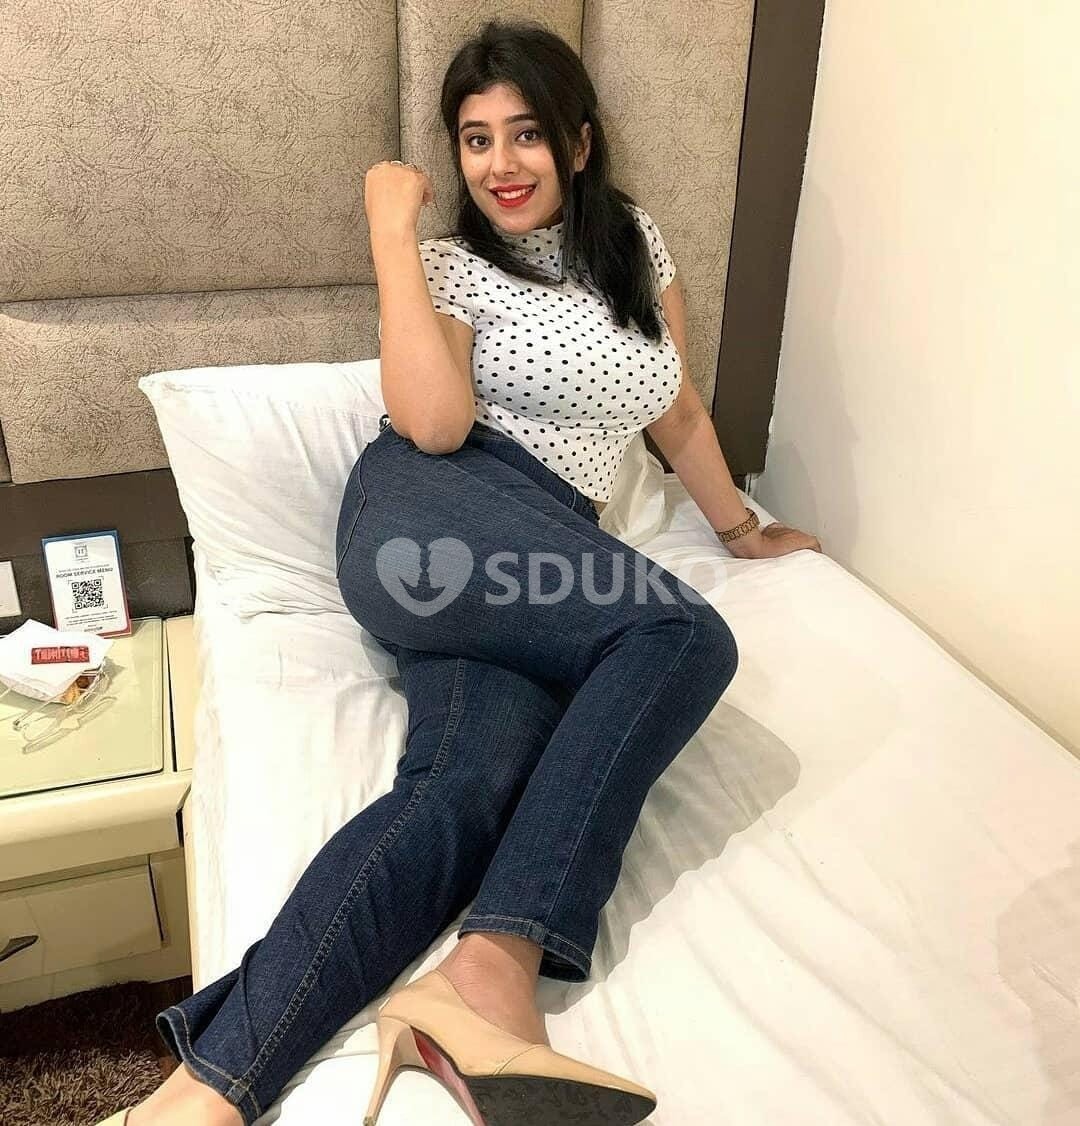 Lonavala 100% guaranteed hot figure best high profile full safe and secure today low price college girl aunty now book n